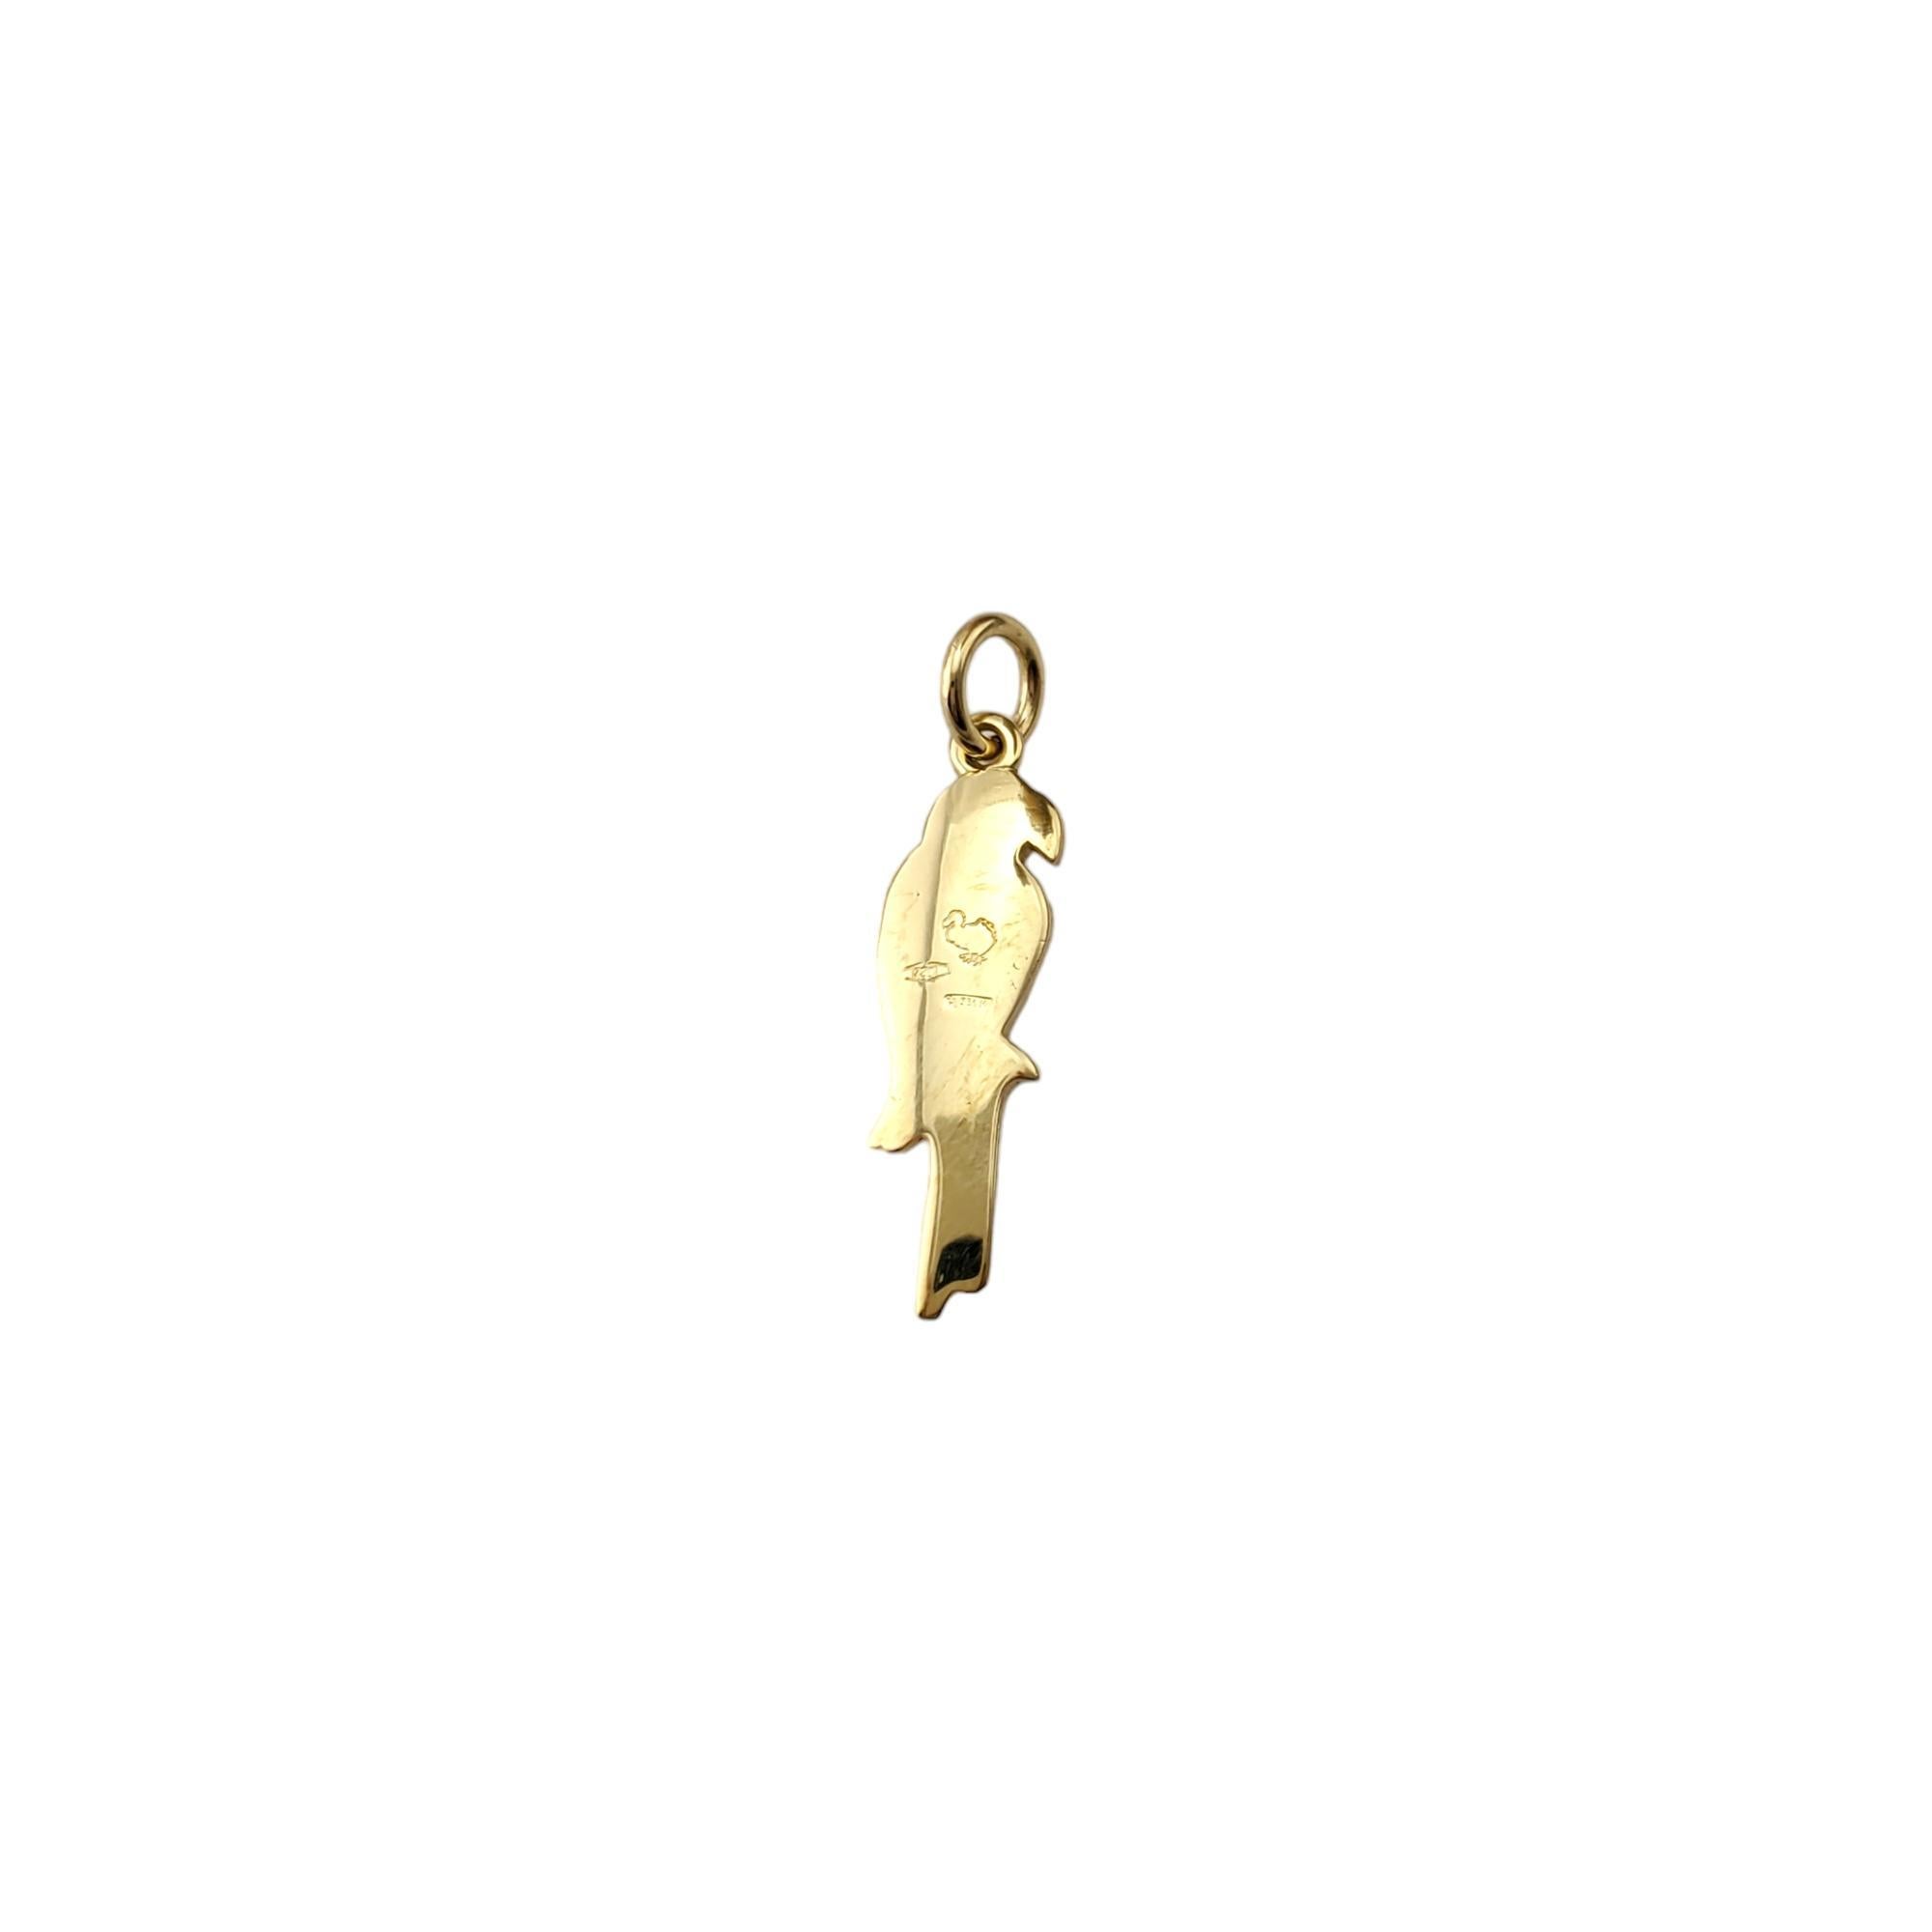 Dodo Pomellato 18K Yellow Gold Parrot Charm 

Elegant charm depicting a parrot in 18K yellow gold.

Hallmark: 750 351 AU

Weight: 2.1 g/1.4 dwt.

Size: 22.6 mm X 6.4 mm X 2.1 mm

Very good condition, professionally polished.

Will come packaged in a